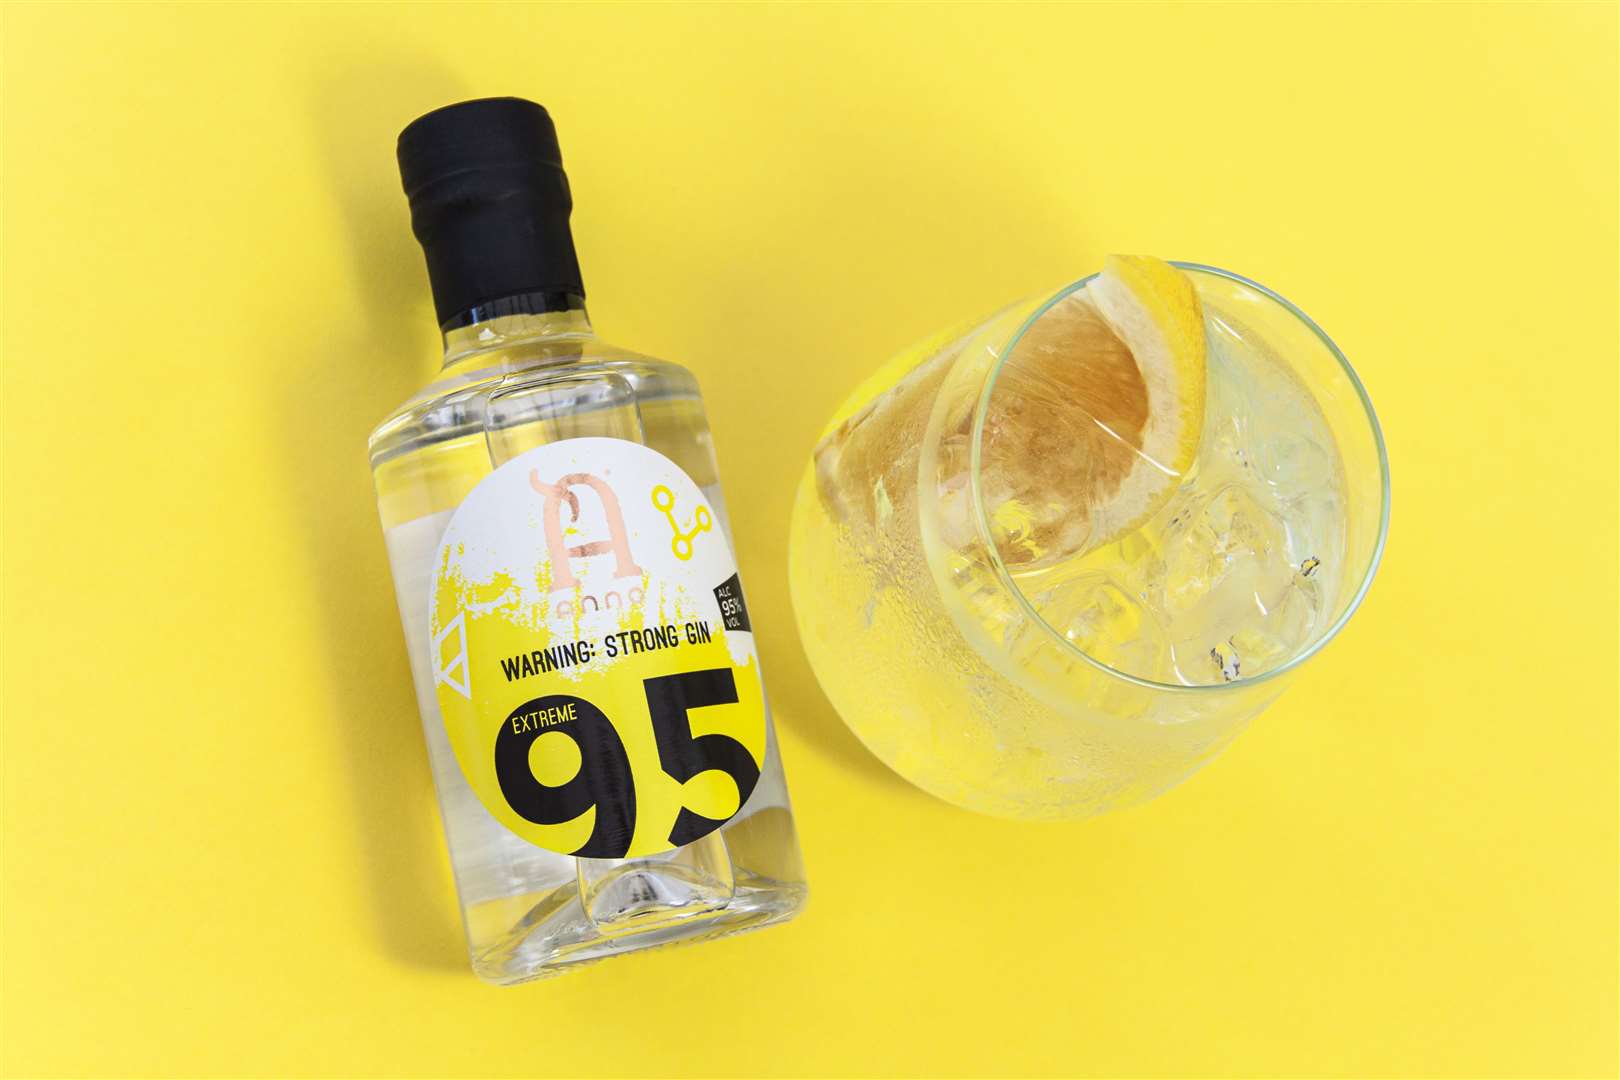 Step carefully - this gin has an ABV of 95%